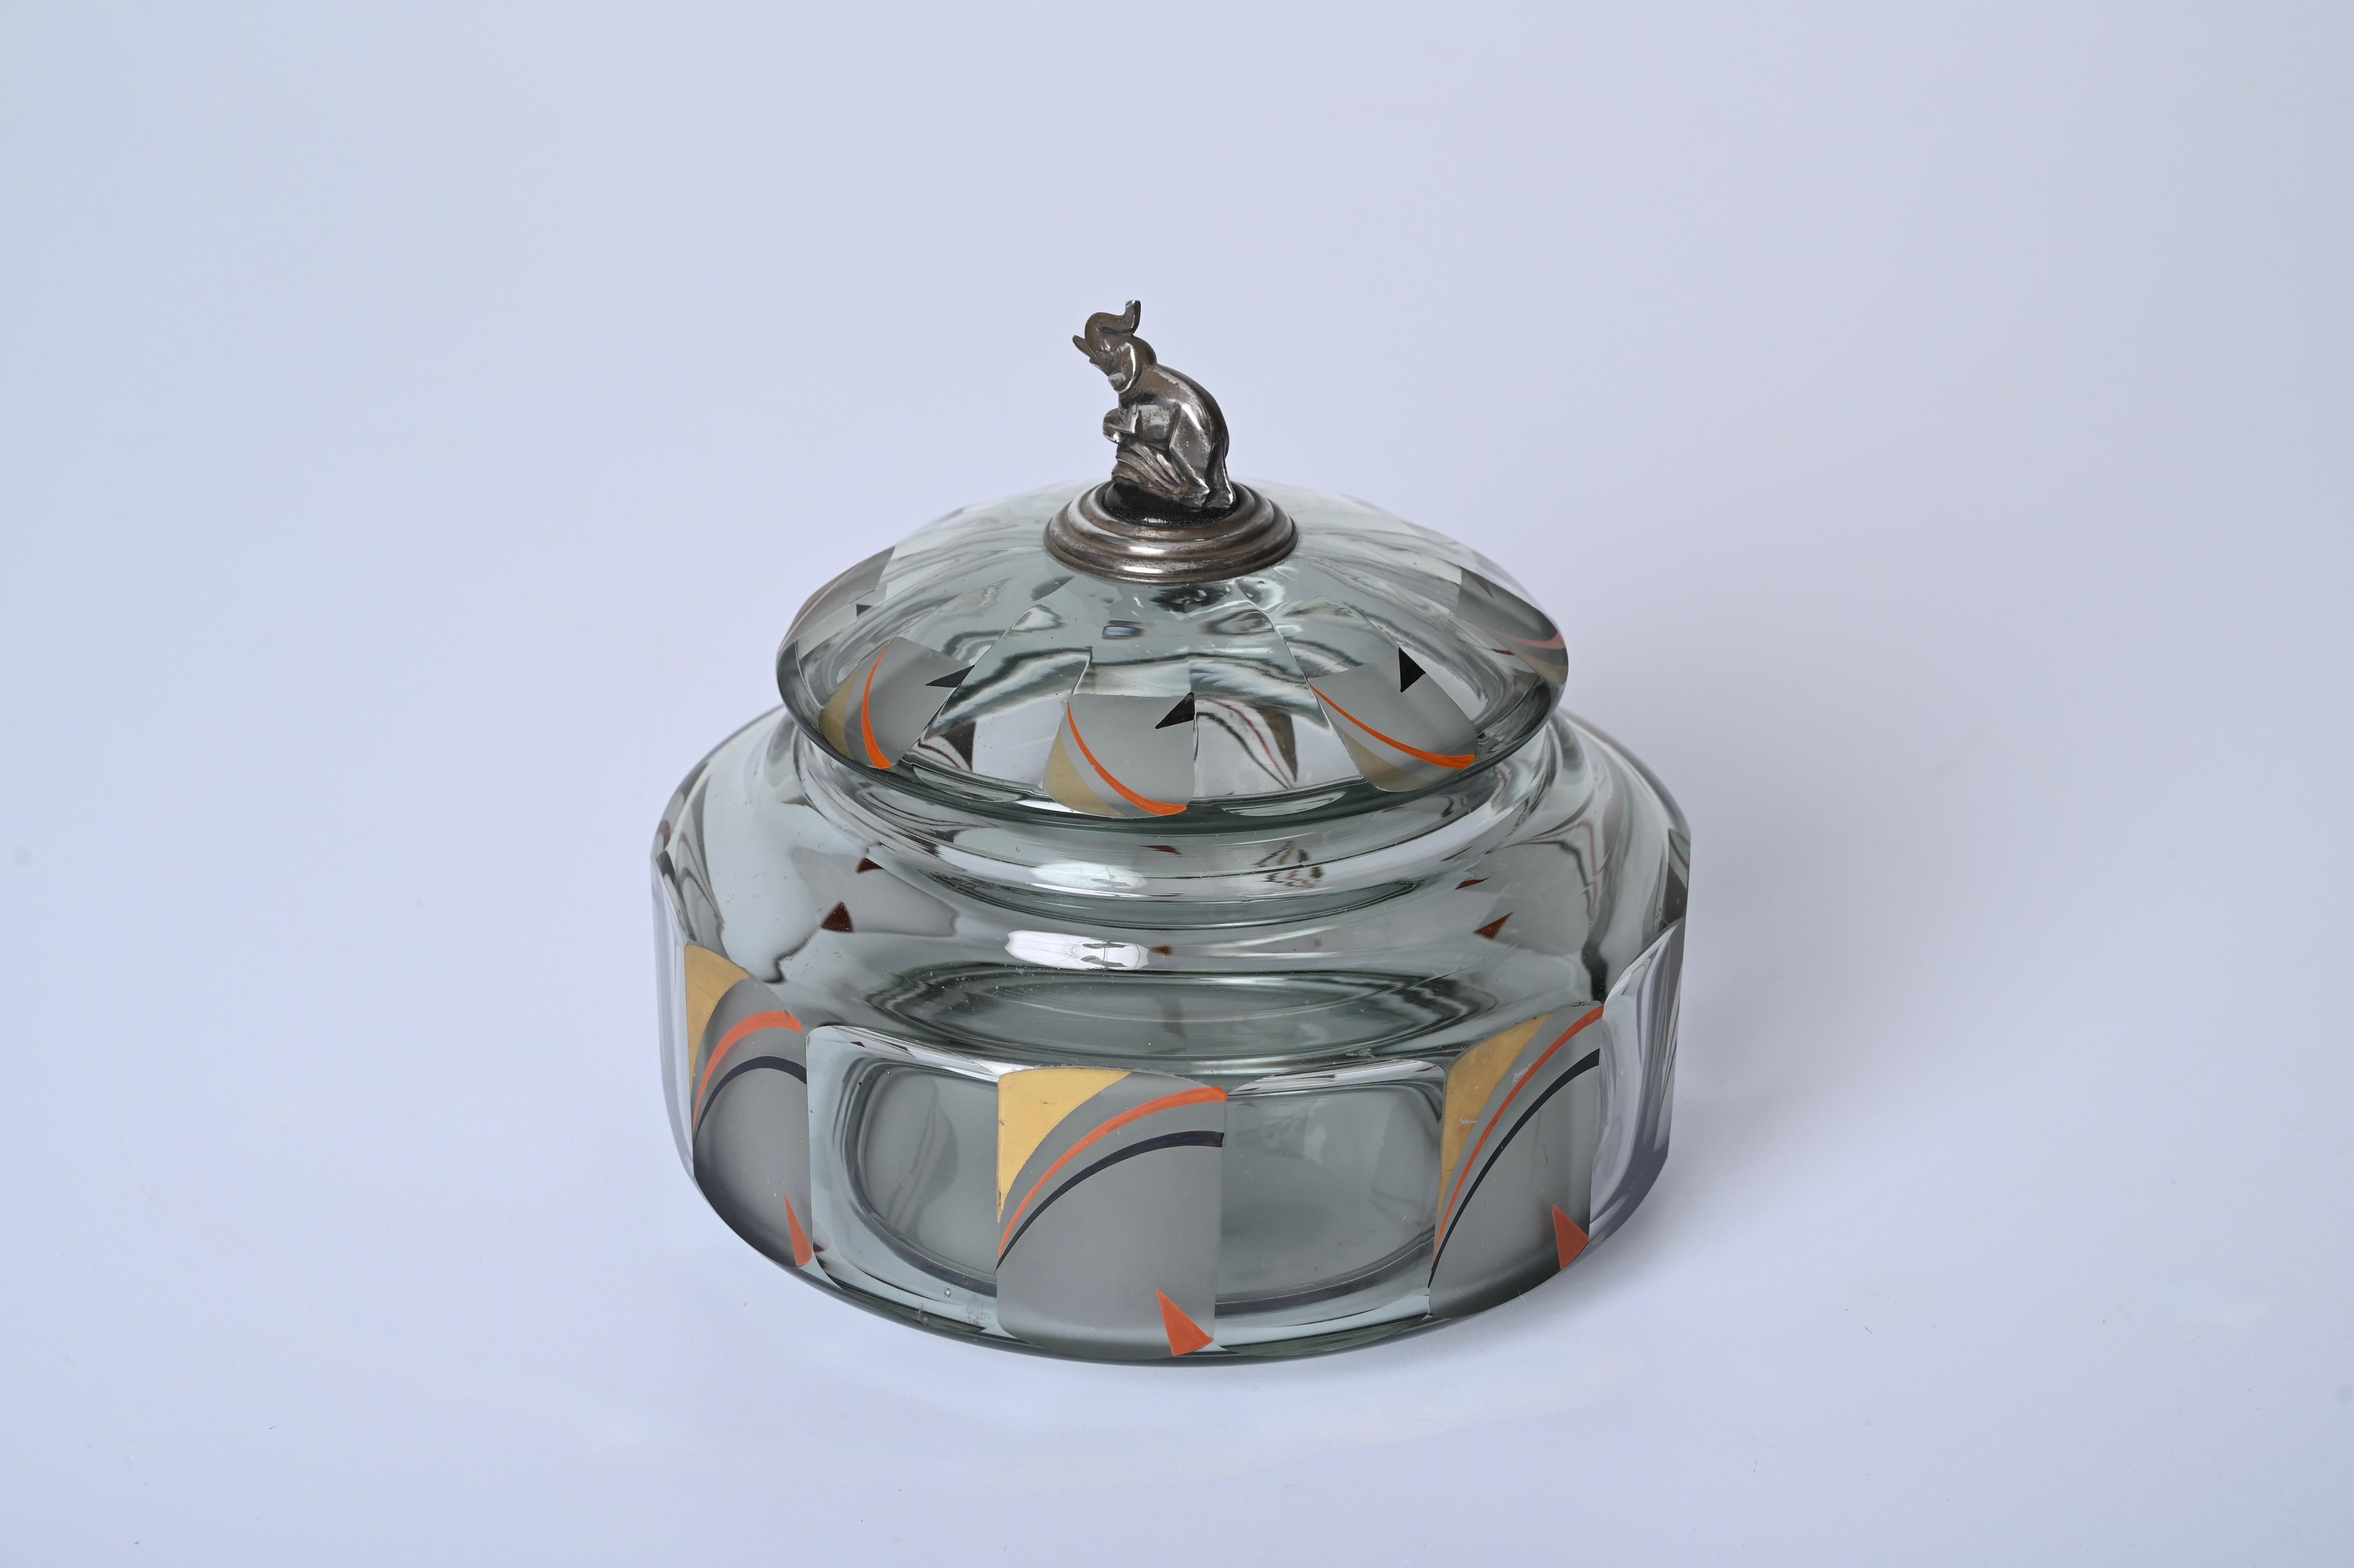 Italian Futurist Crystal Enameled Box with Silver Sculpture, Italy, 1933 For Sale 2